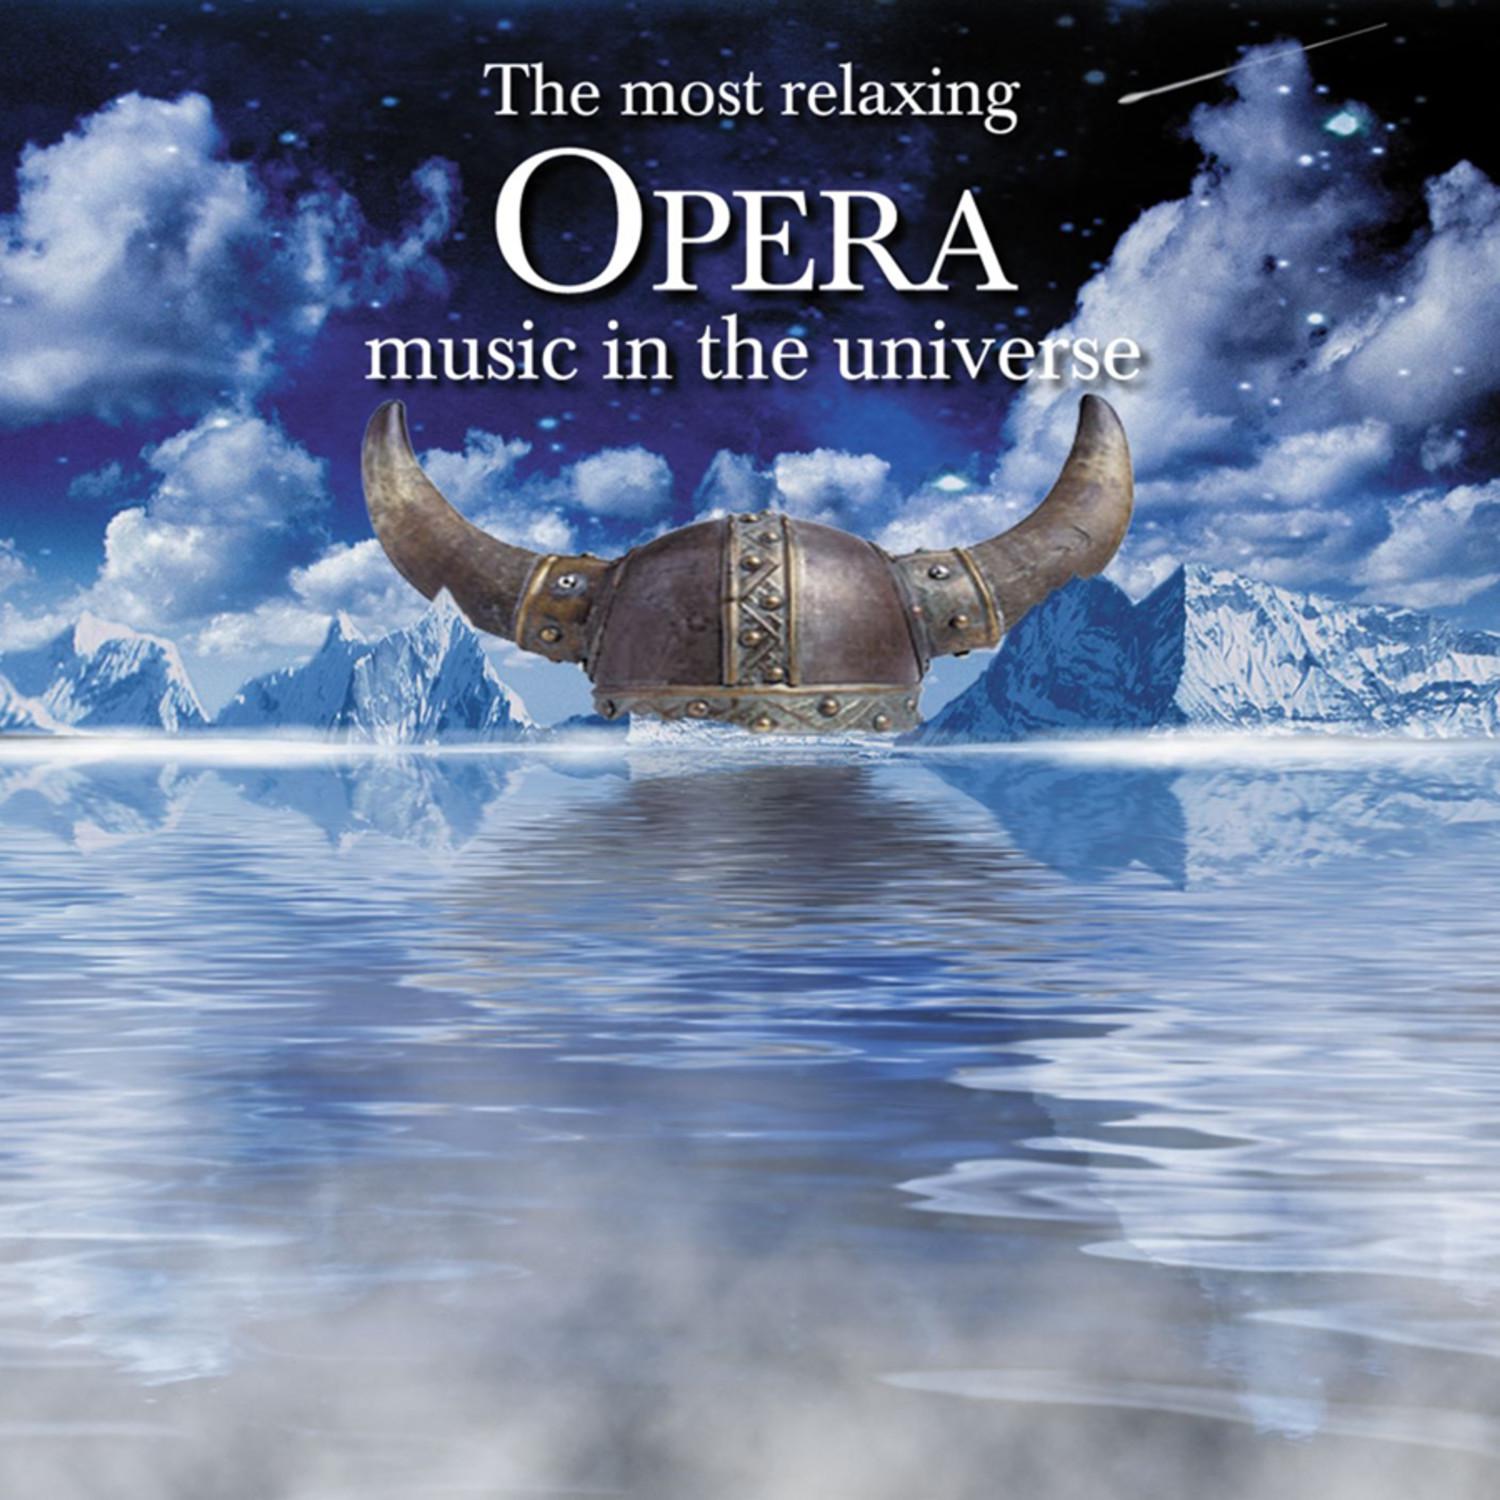 The Most Relaxing Opera Music in the Universe